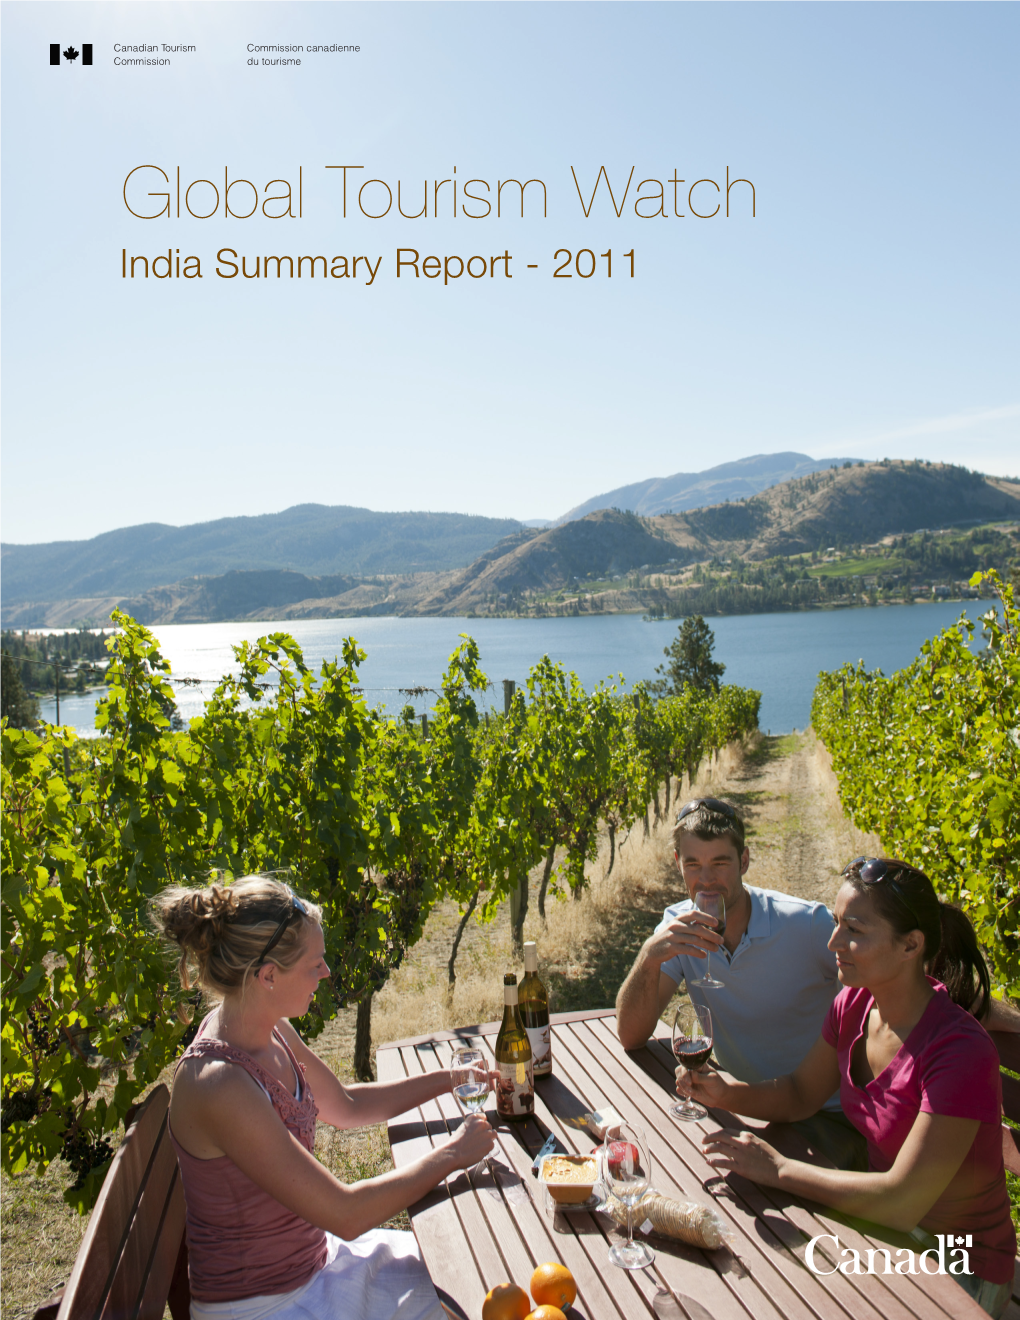 Global Tourism Watch India Summary Report - 2011